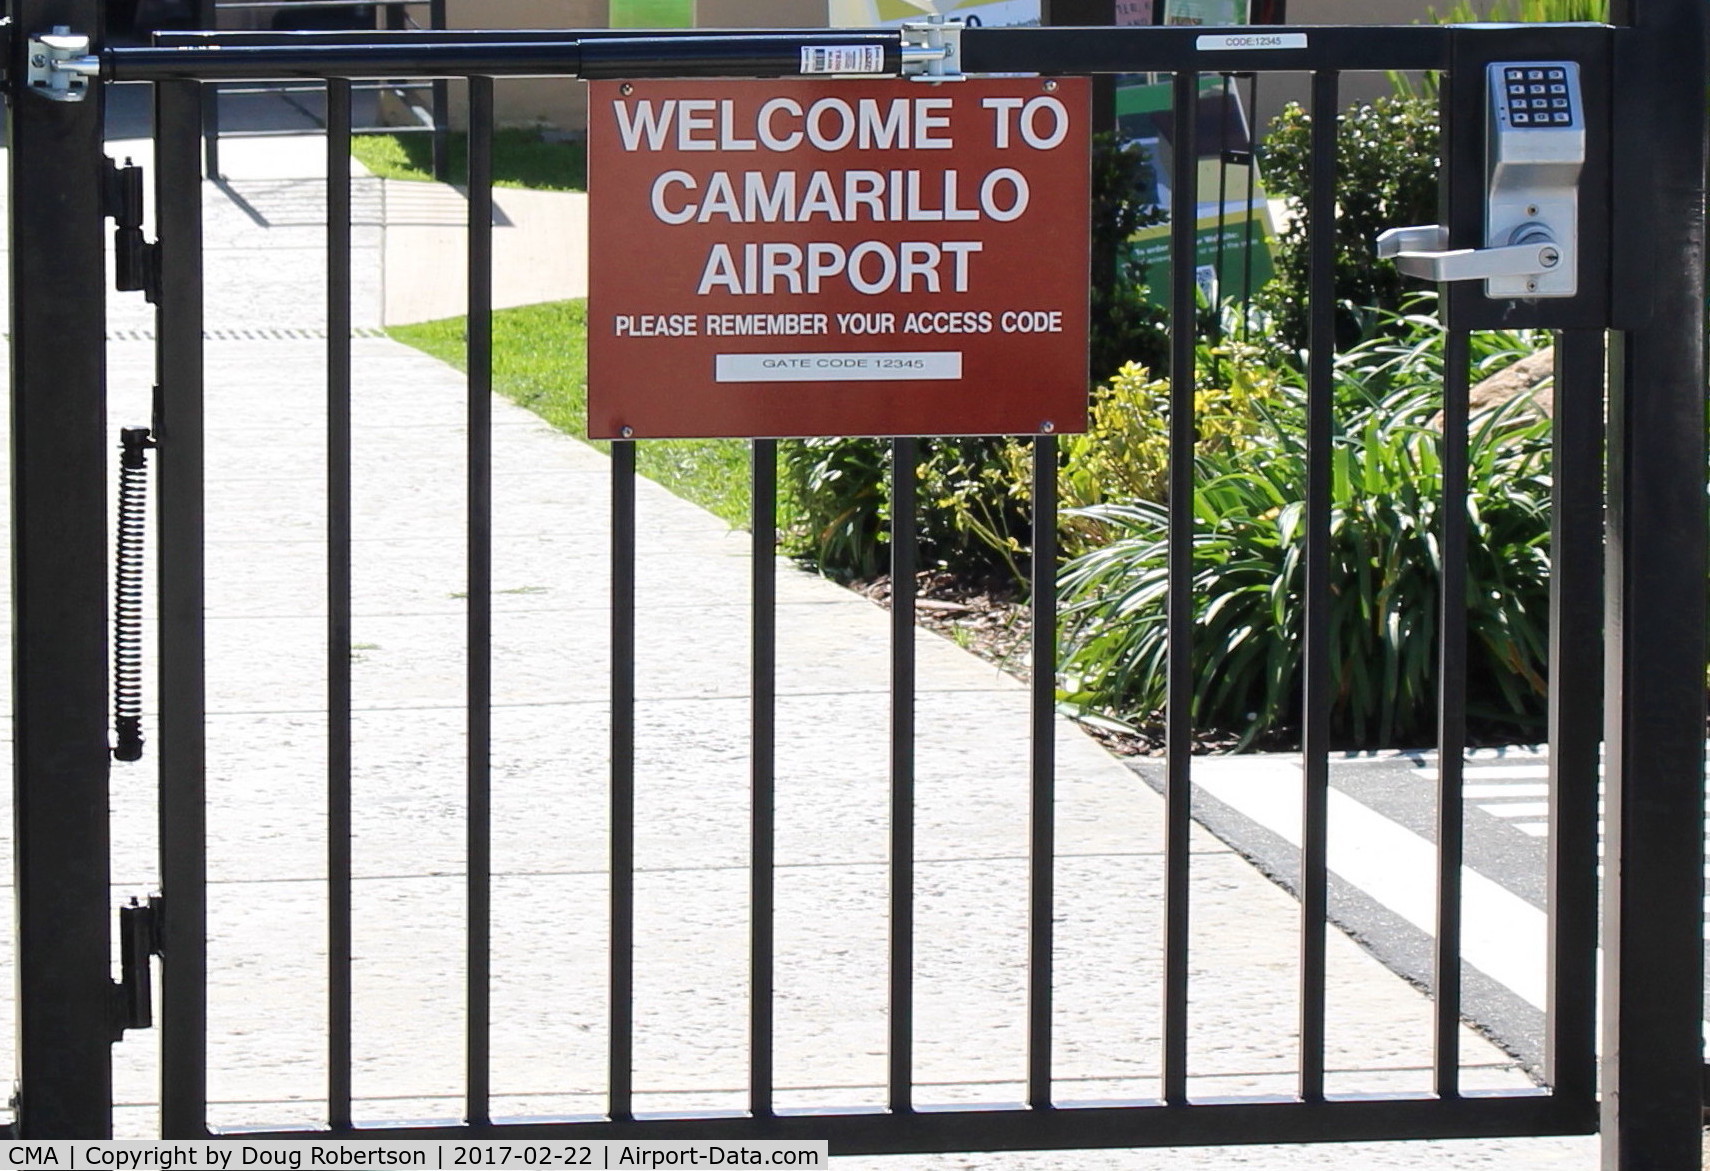 Camarillo Airport (CMA) - Pass gate from/to Waypoint Cafe and transient aircraft ramp. Remember the simple/easy pass code numerals to get back to your aircraft.